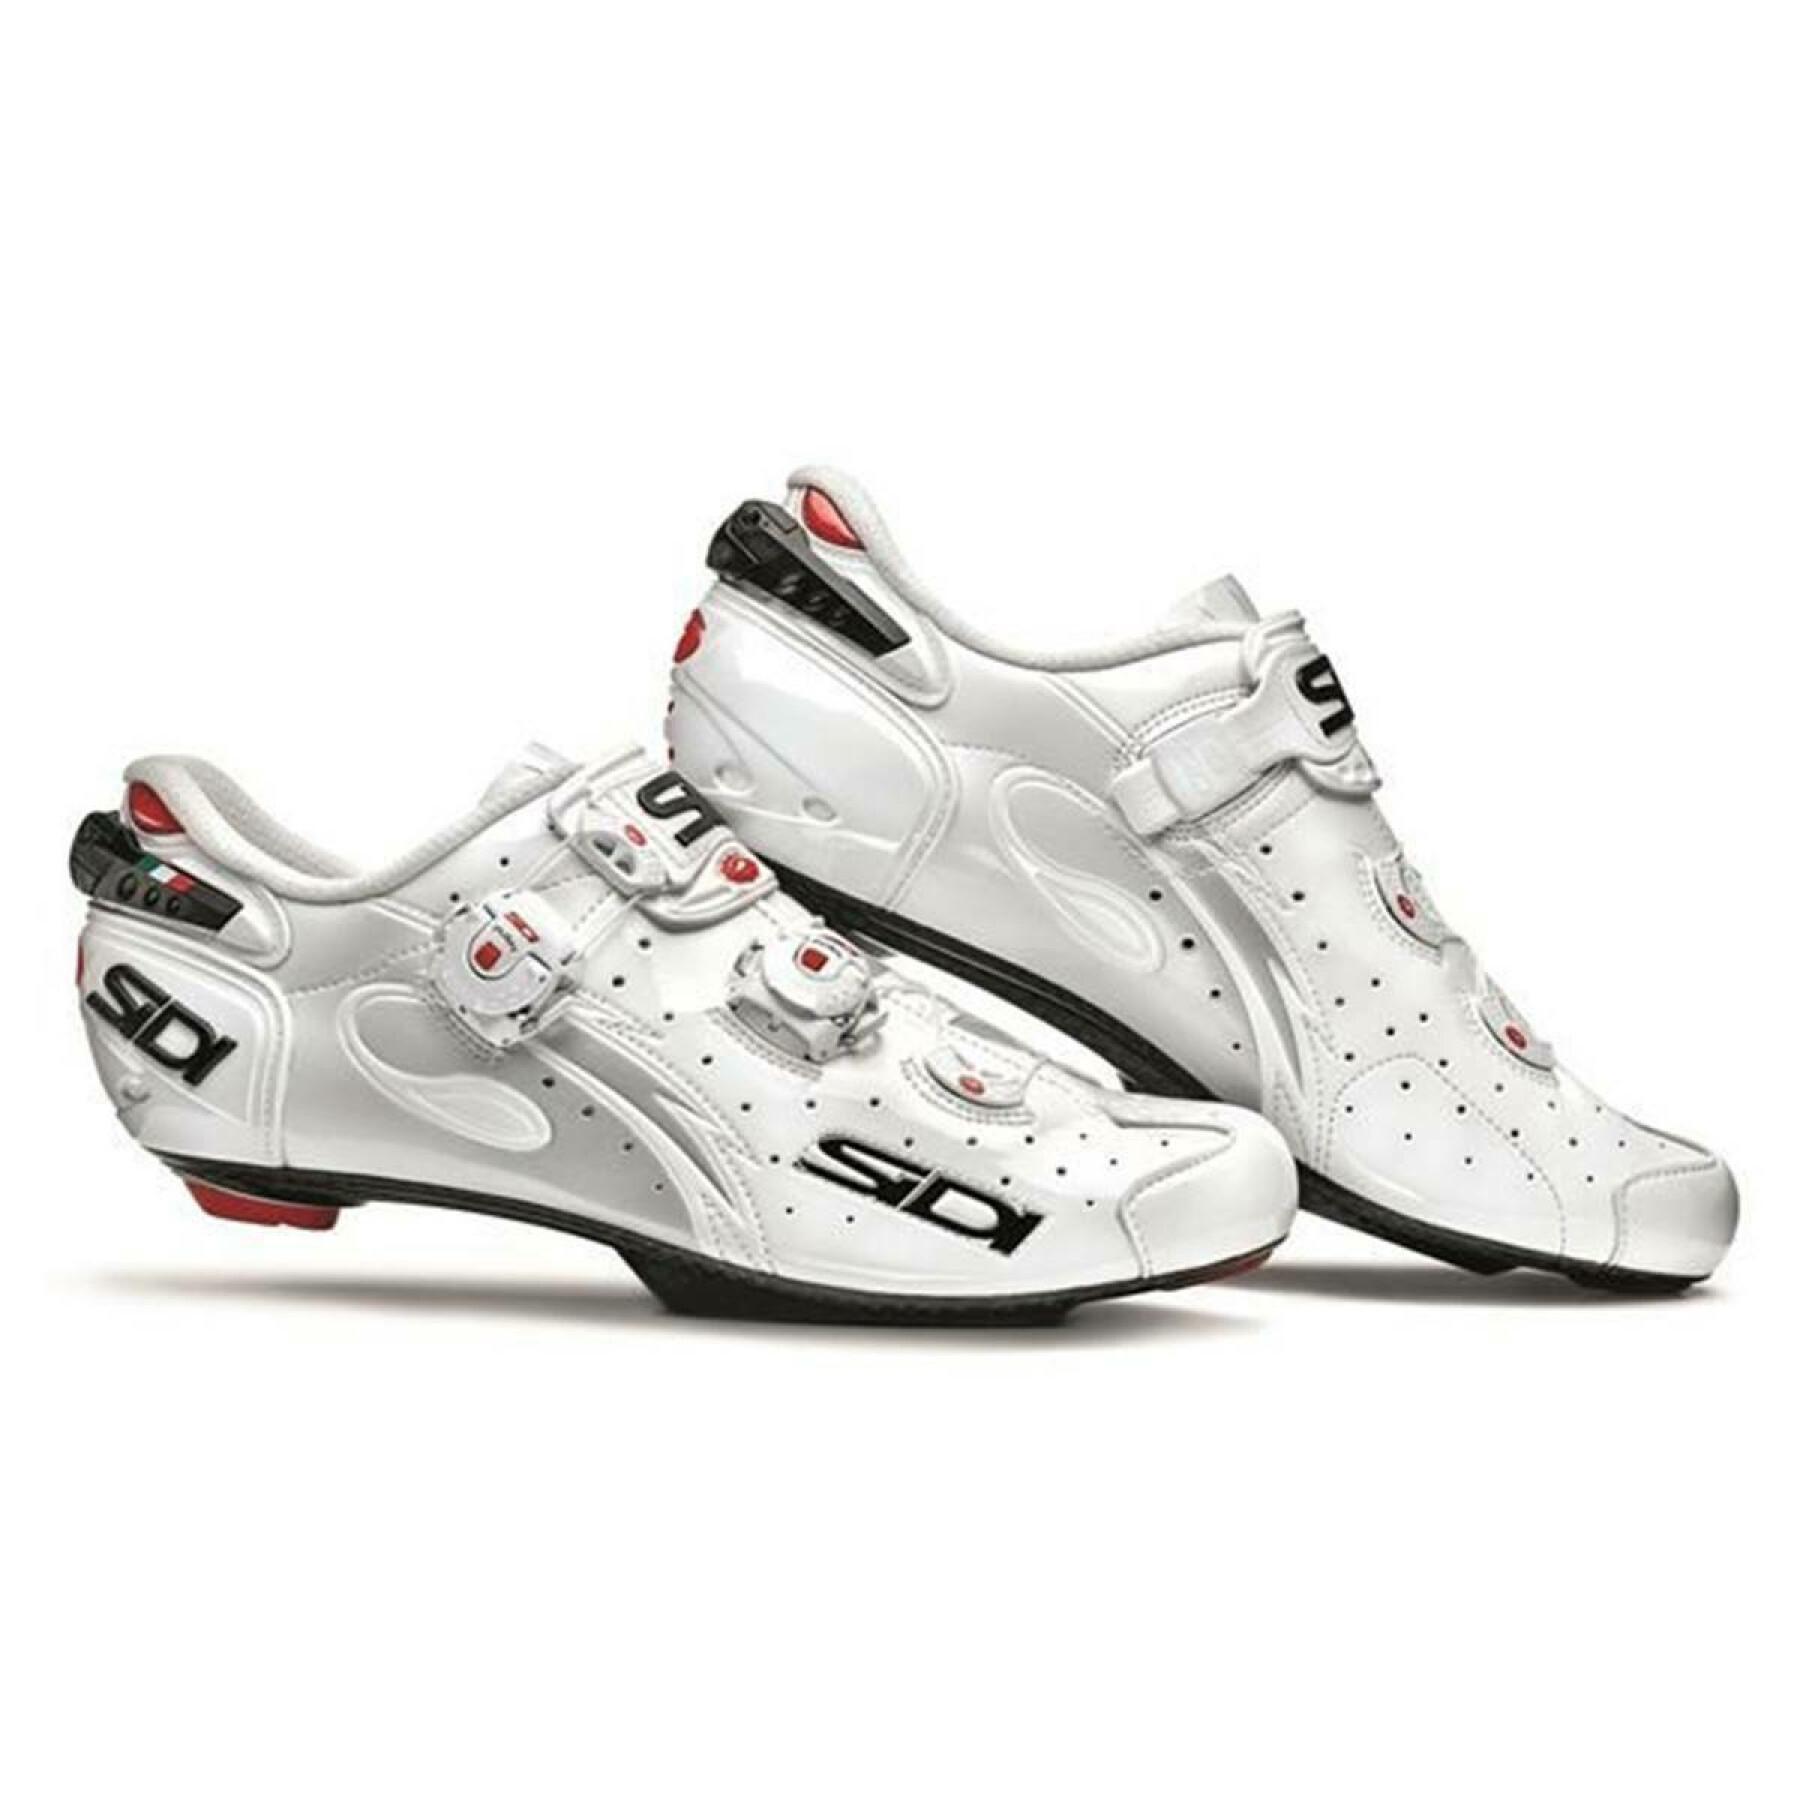 Shoes Sidi Wire carbon speedplay